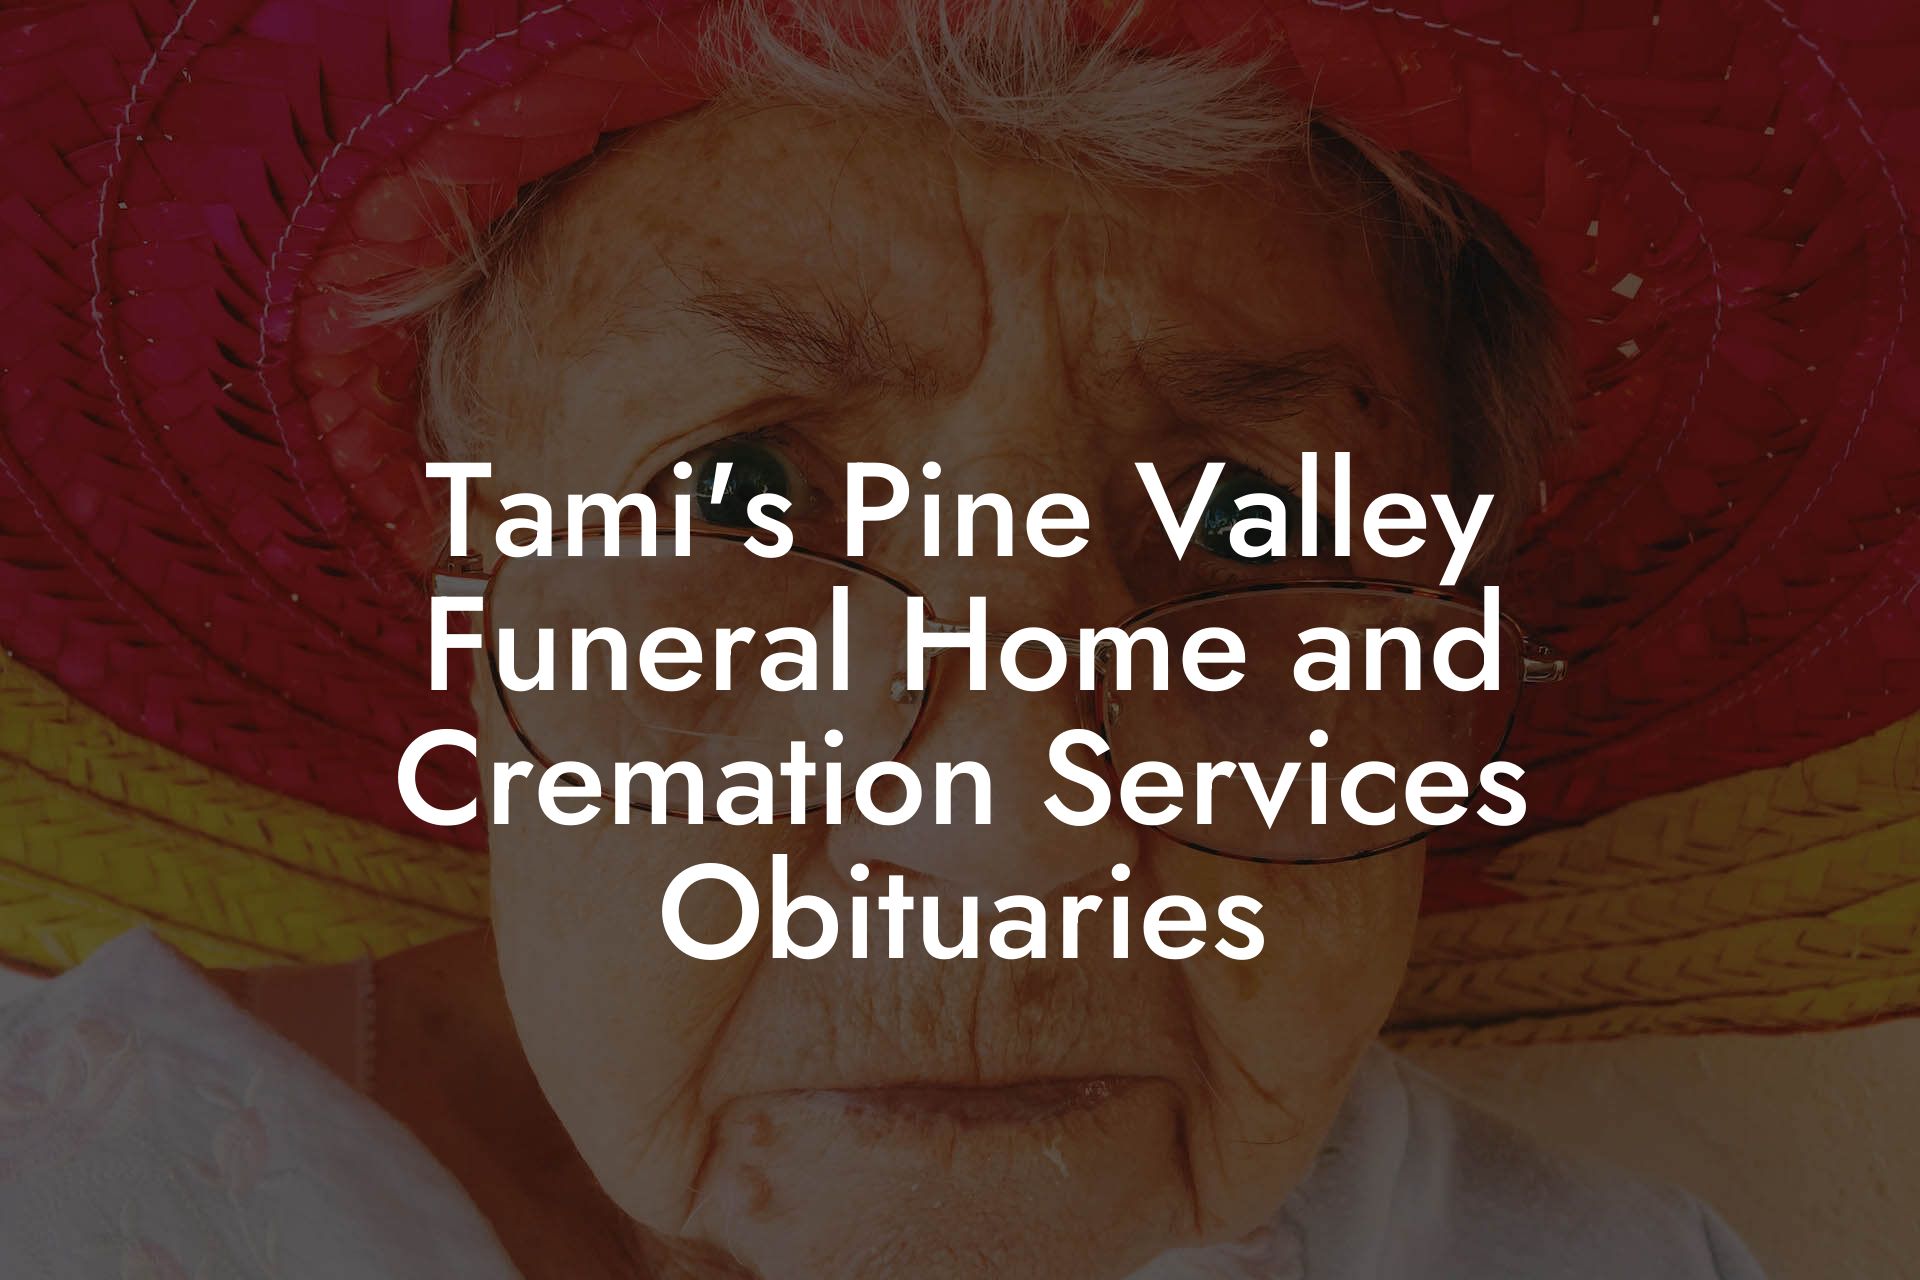 Tami's Pine Valley Funeral Home and Cremation Services Obituaries